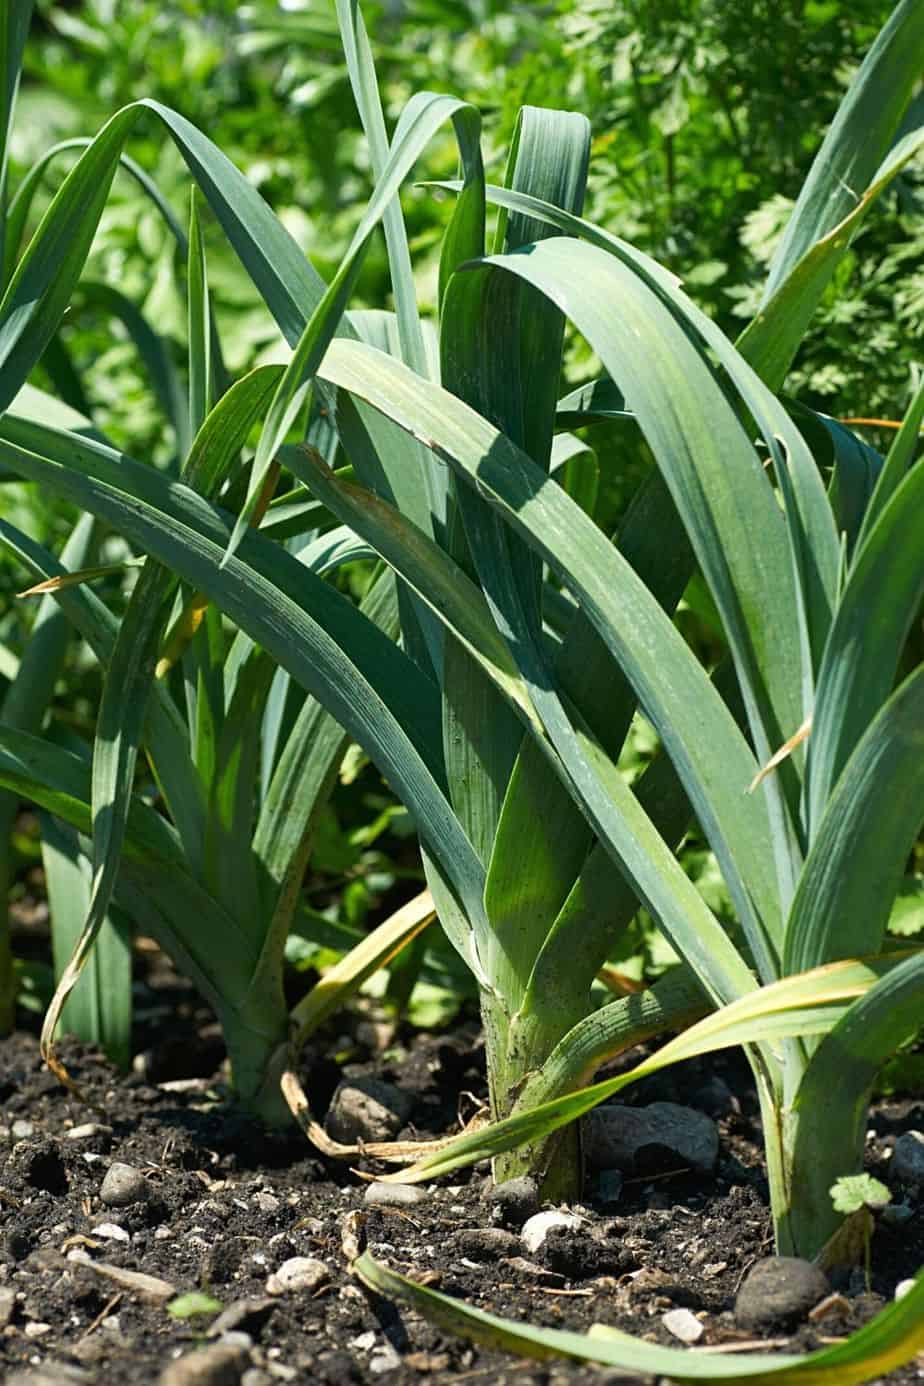 Leek is a great vegetable to grow in a raised bed garden as it is readily available, cheap, and manageable